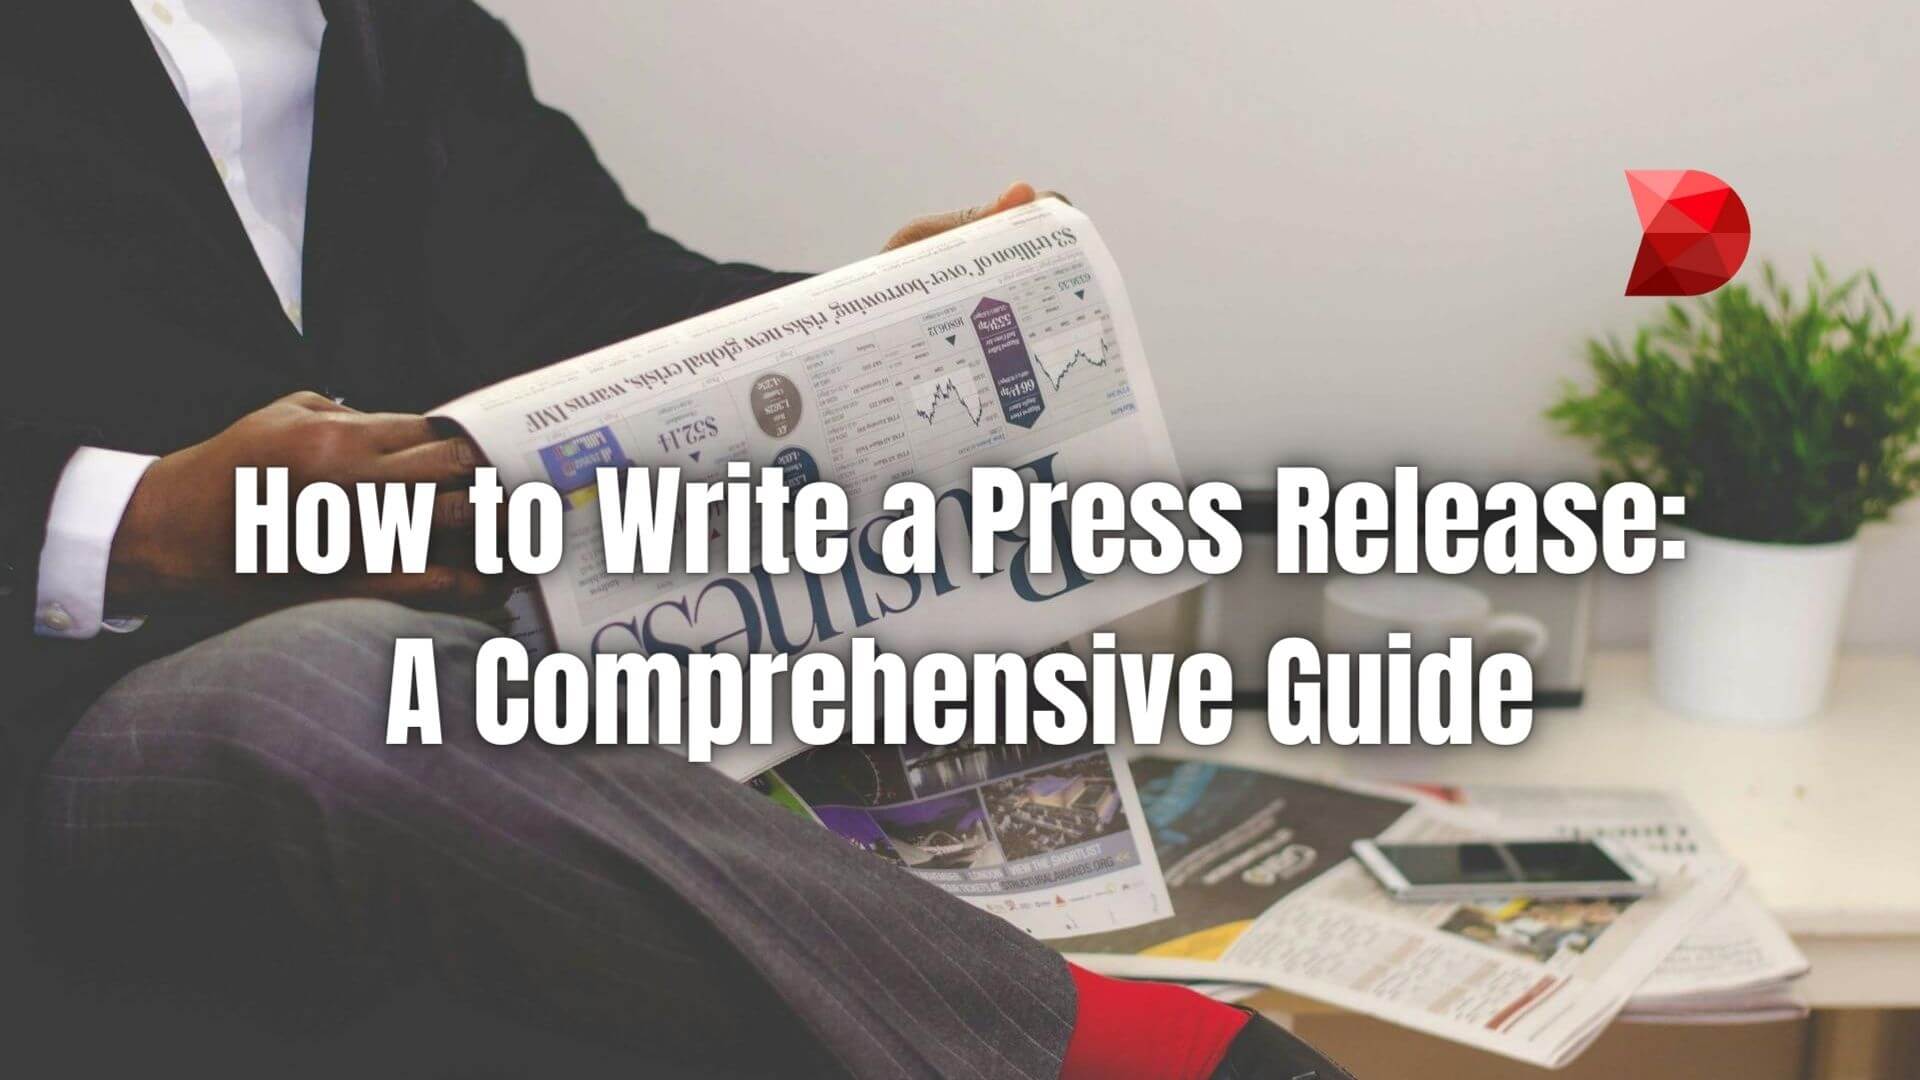 Elevate your press release game with our template guide. Discover expert tips and techniques to draft compelling releases that get noticed.